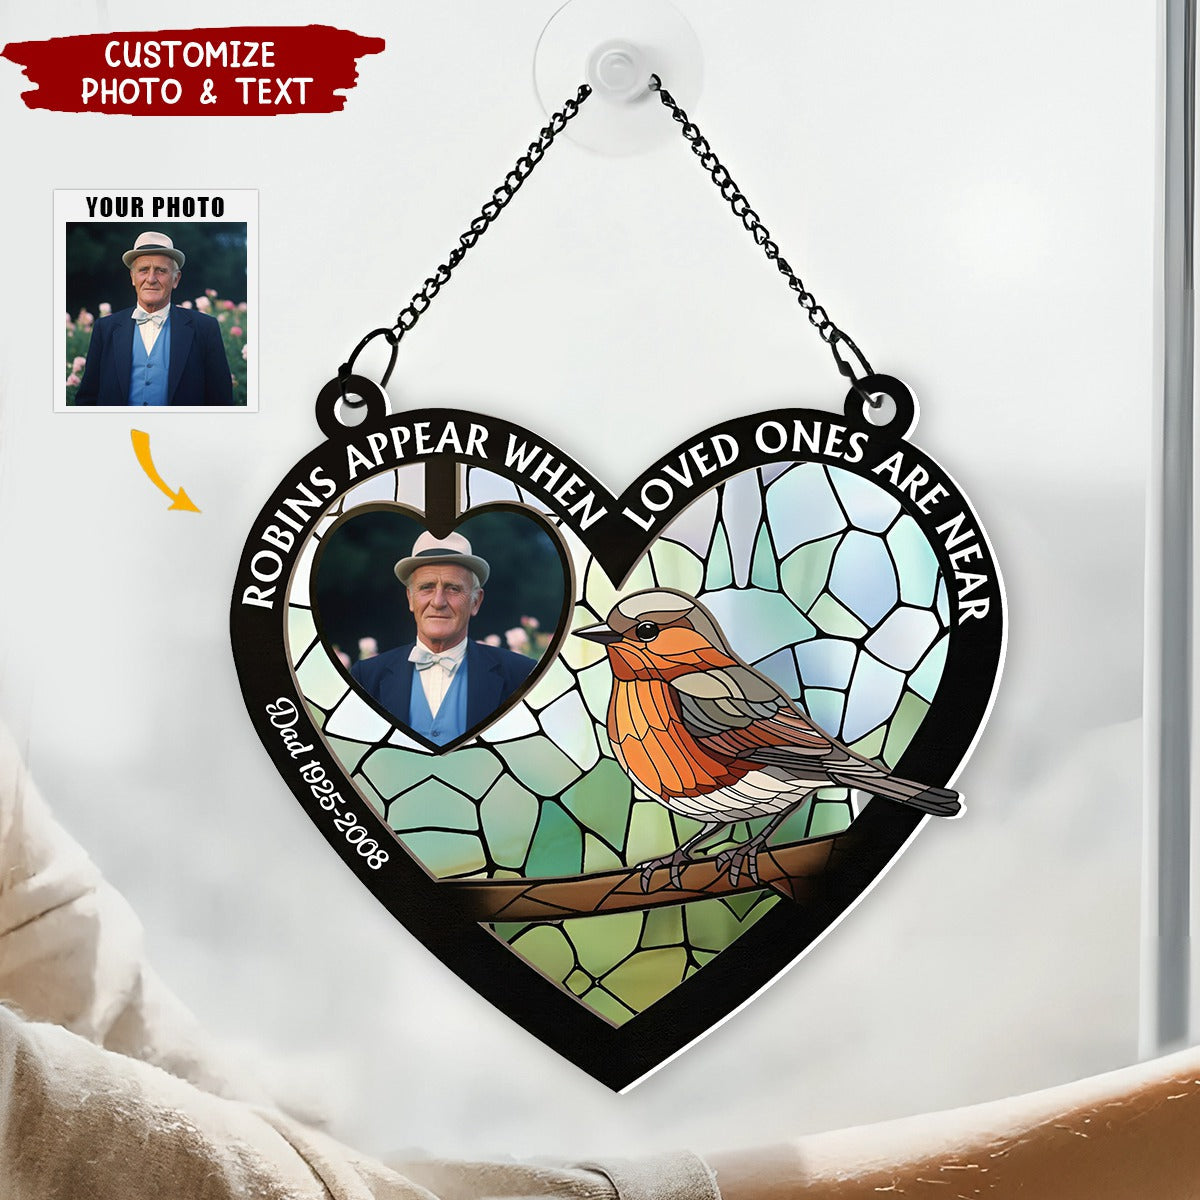 Robins Appear When Loved Ones Are Near - Personalized Window Hanging Suncatcher Ornament